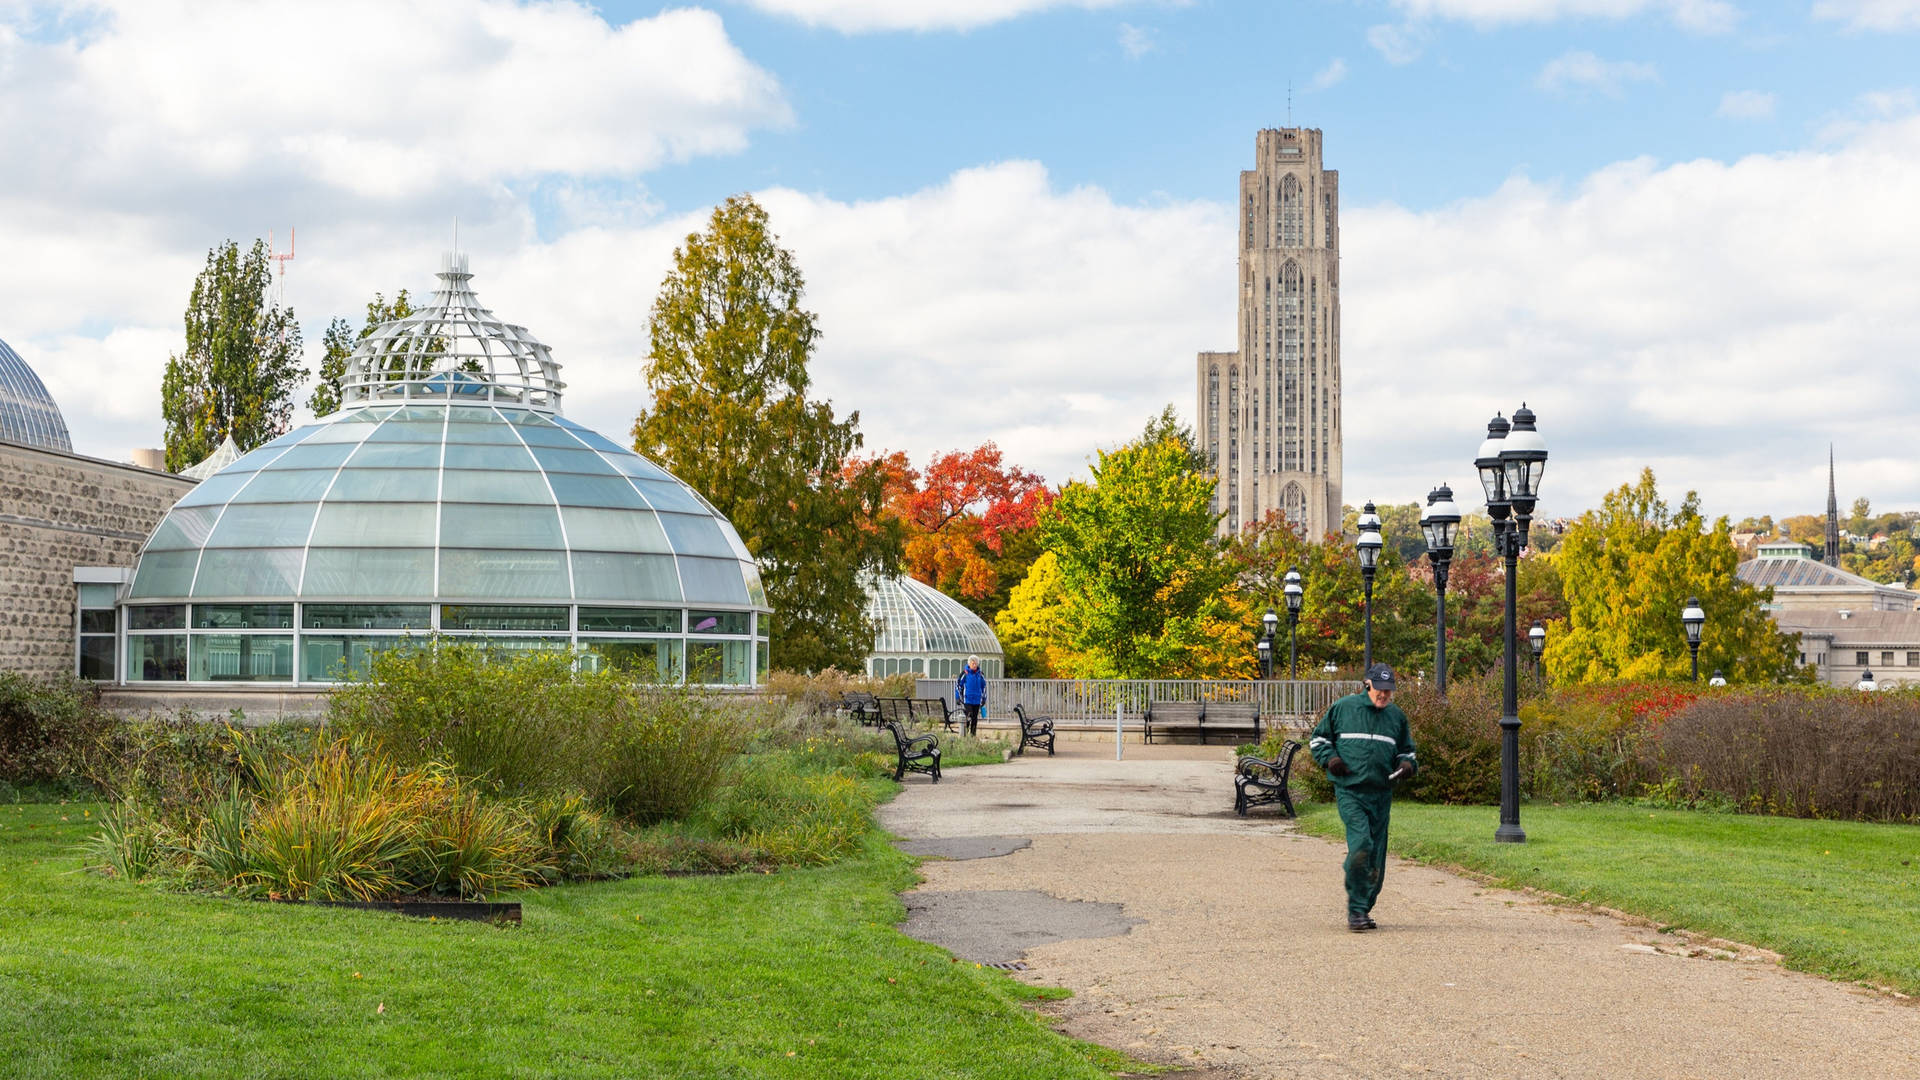 University Of Pittsburgh And Phipps Conservatory Wallpaper